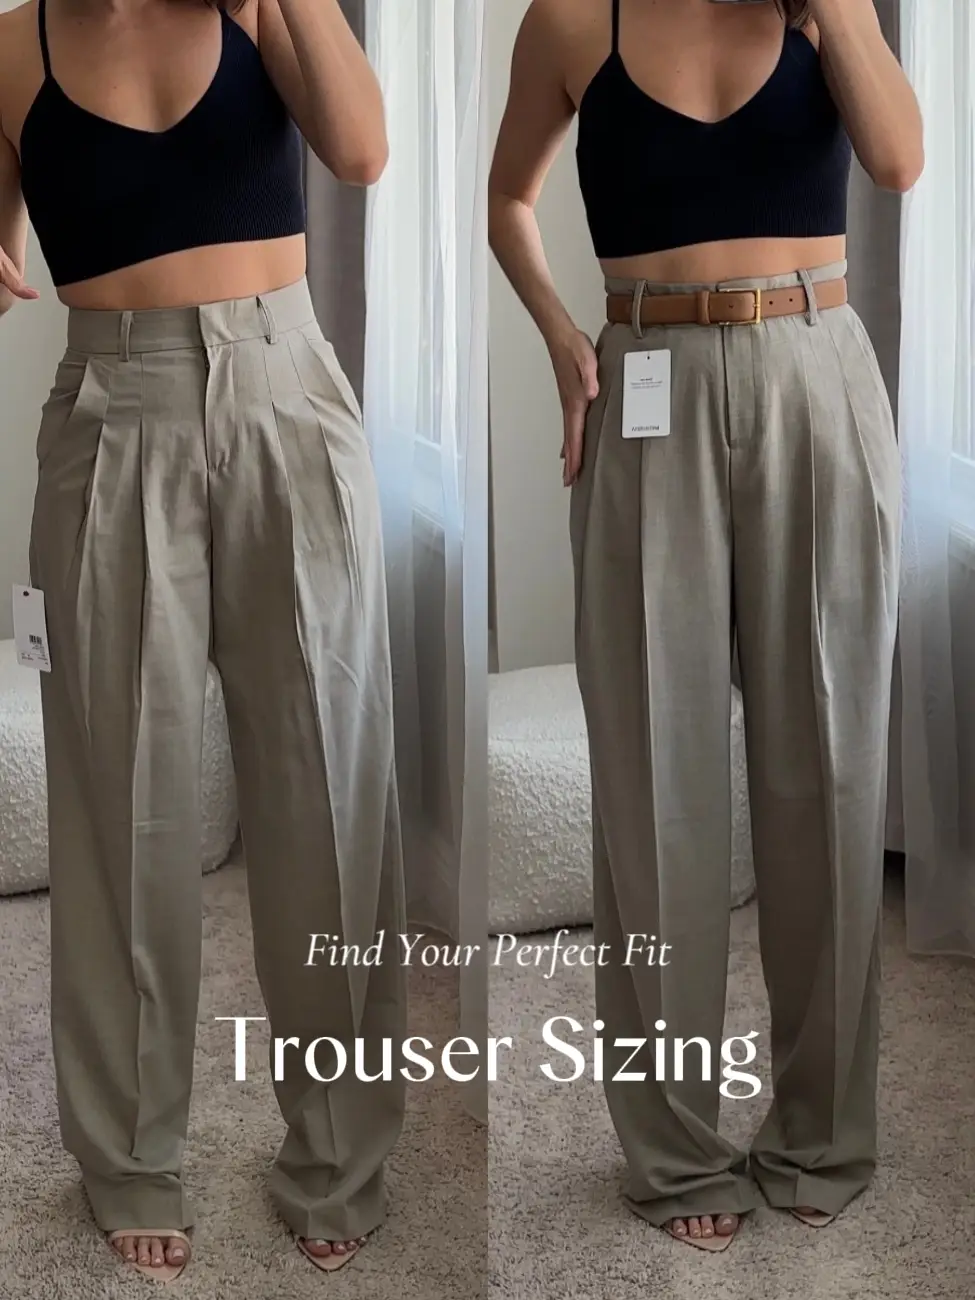 How to find the perfect fit in trousers